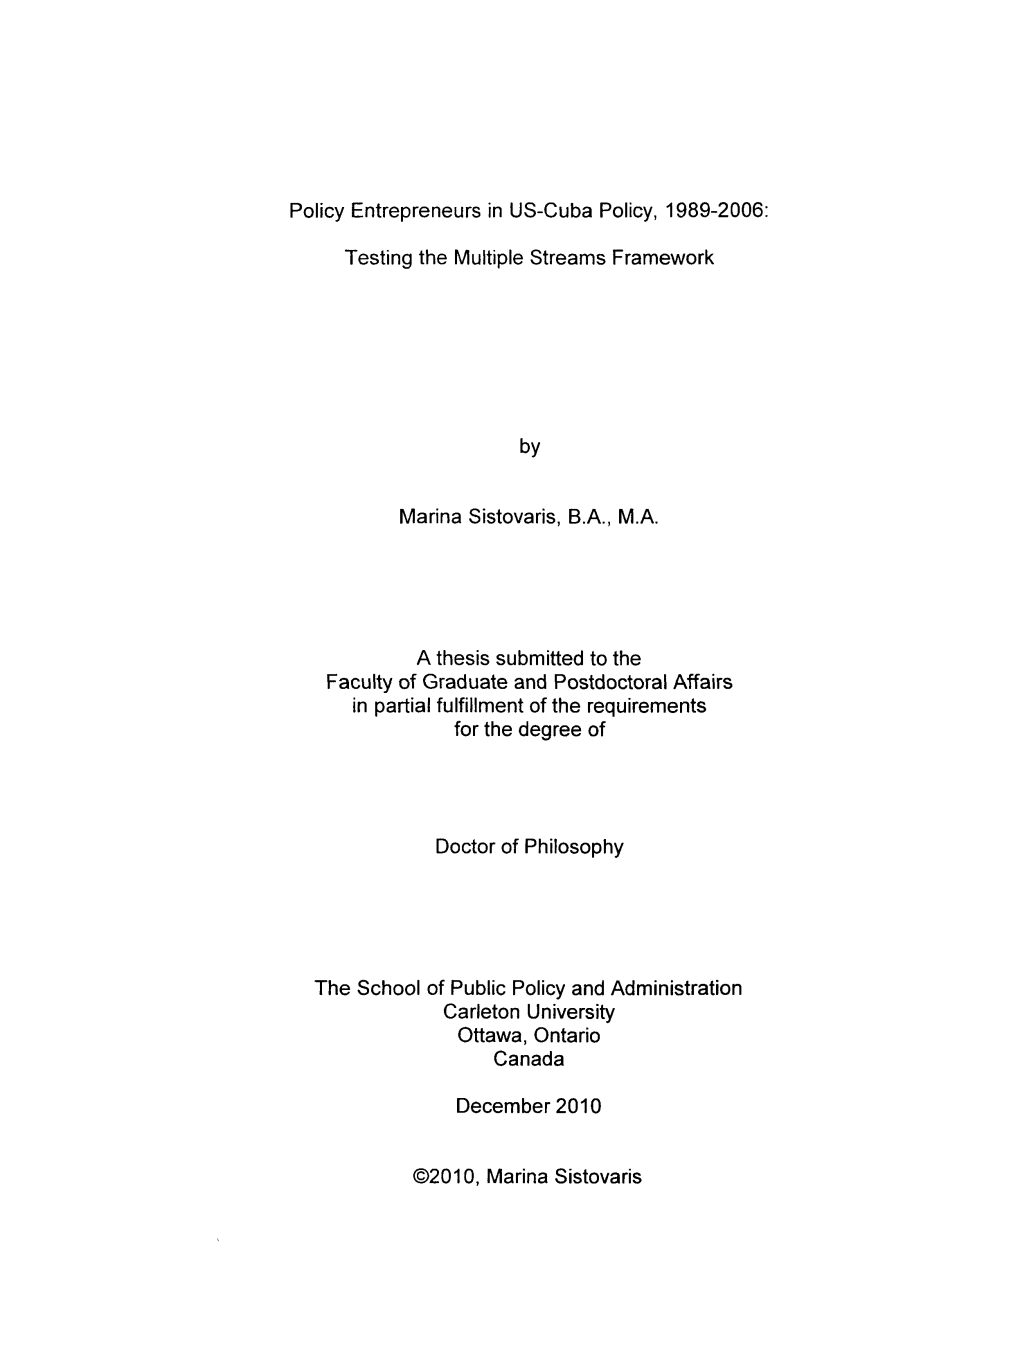 Policy Entrepreneurs in US-Cuba Policy, 1989-2006: Testing The